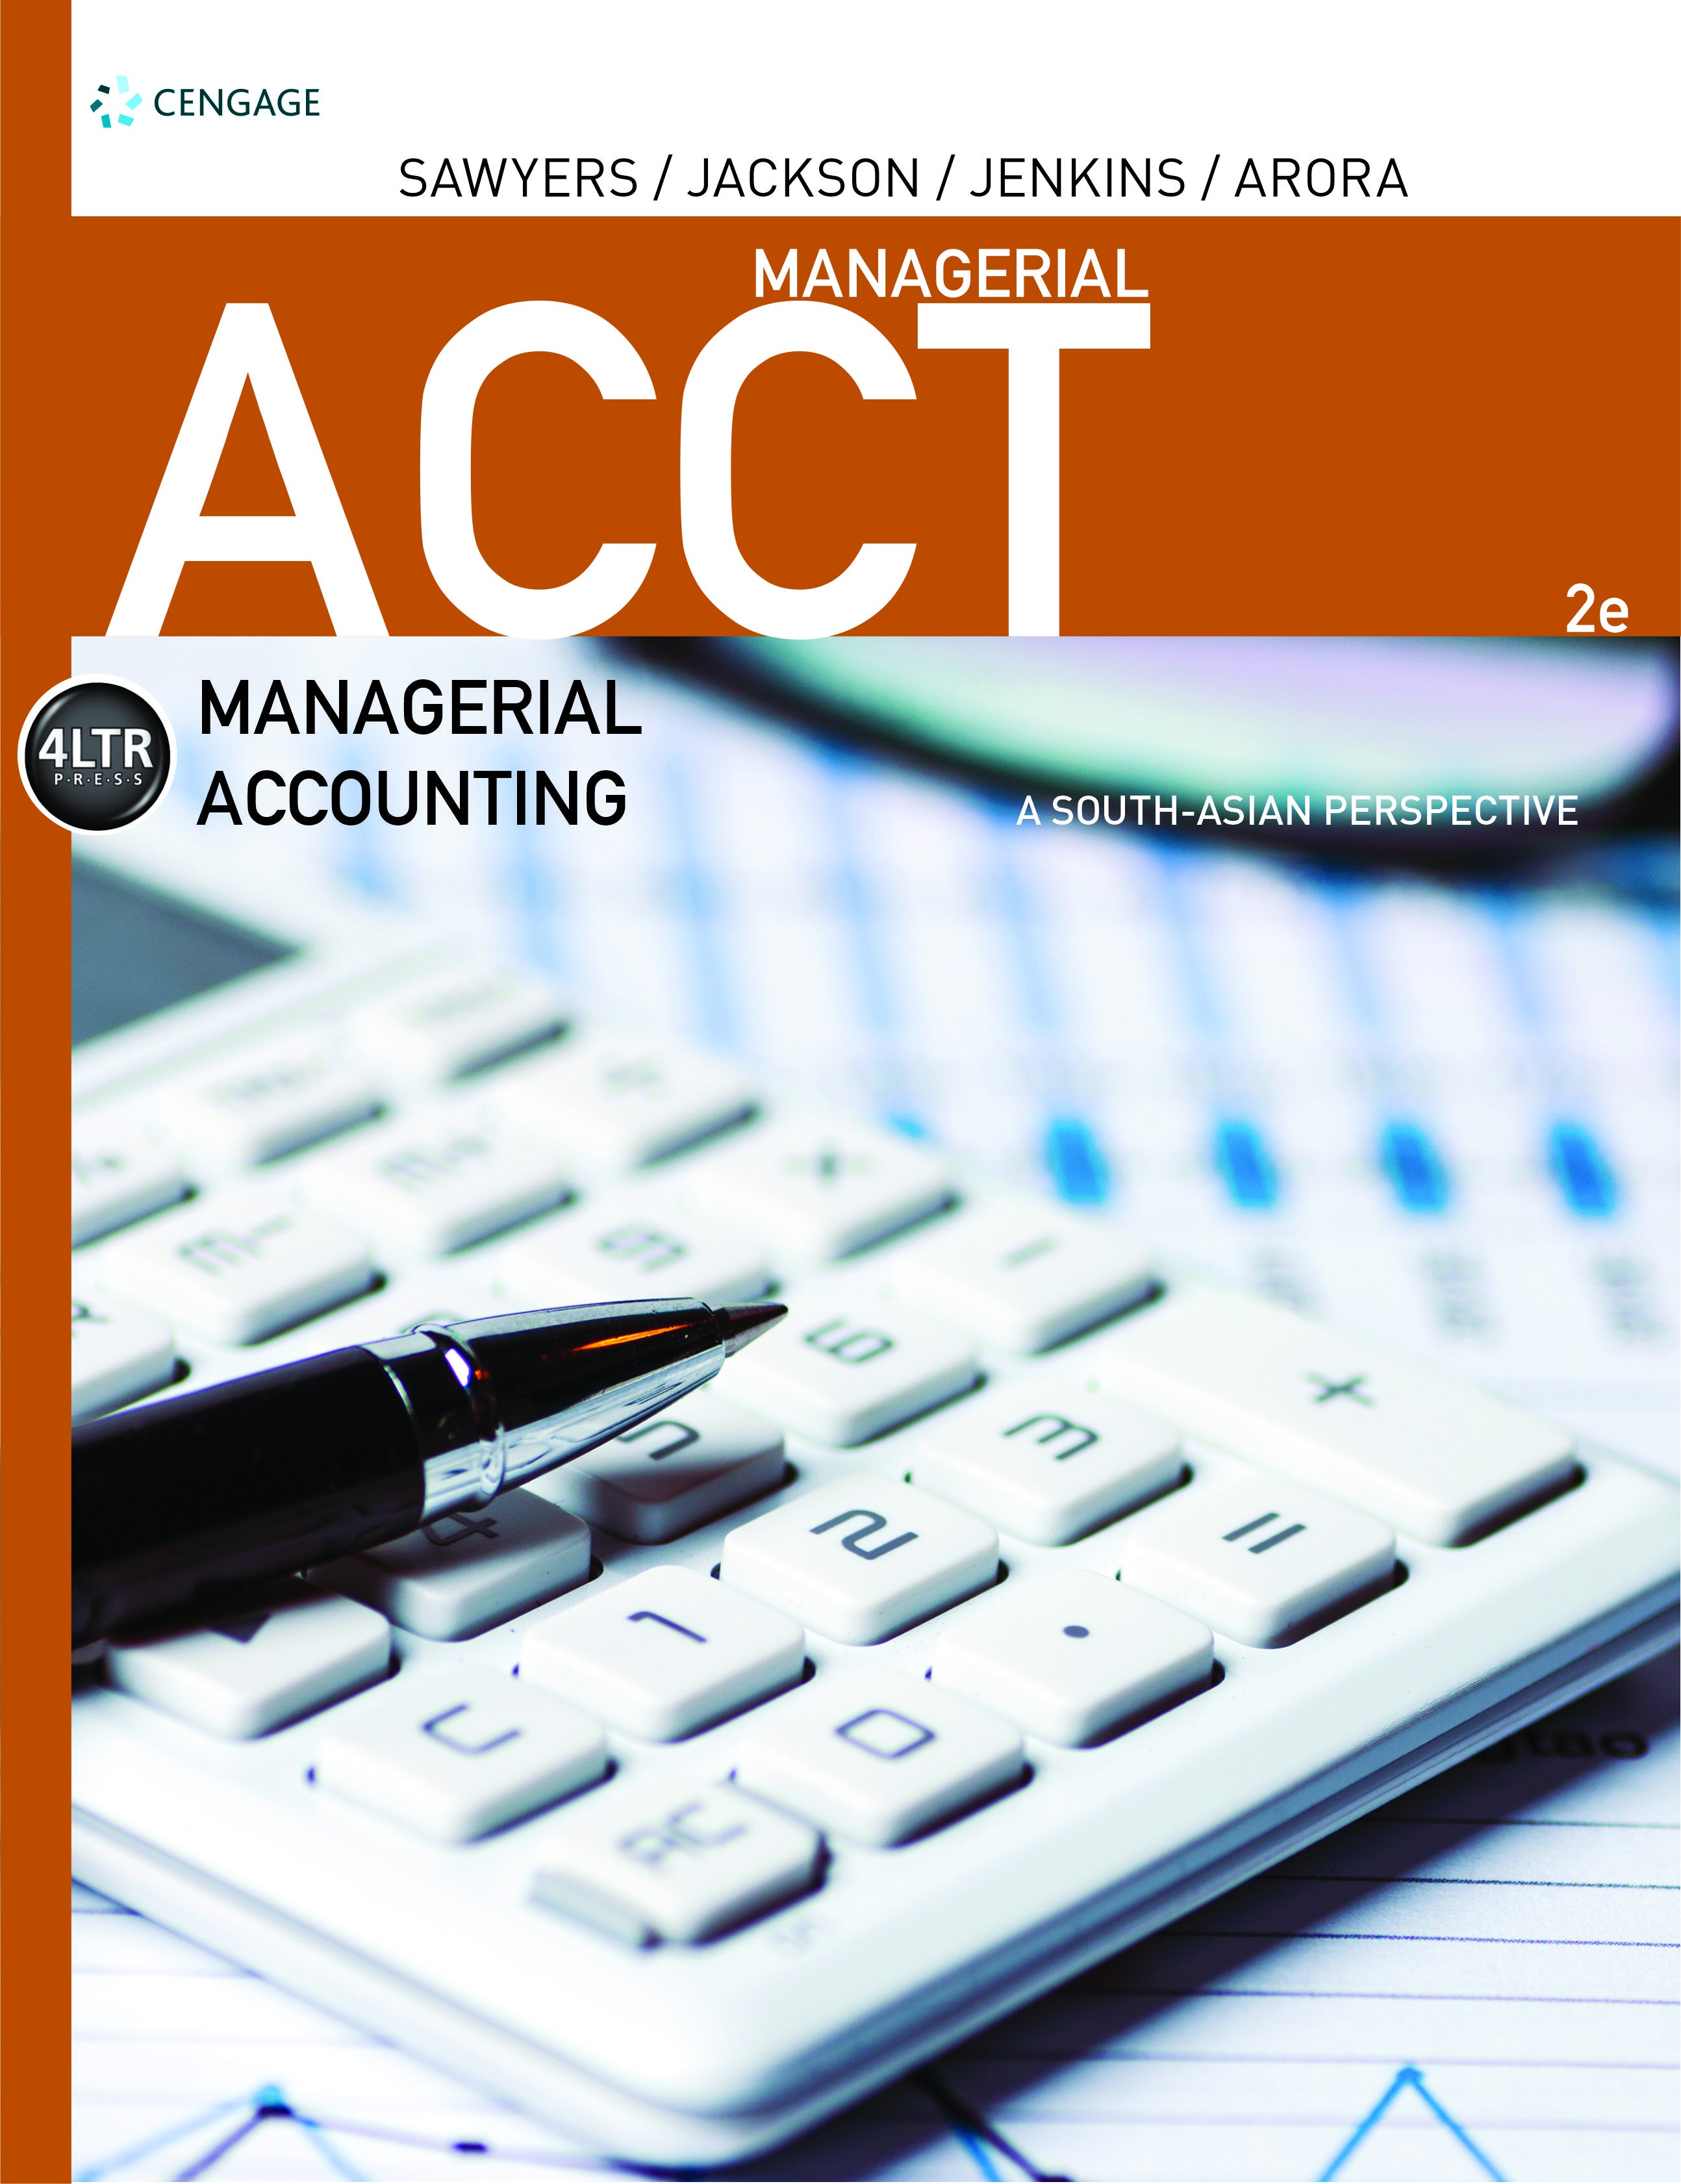 Managerial ACCT